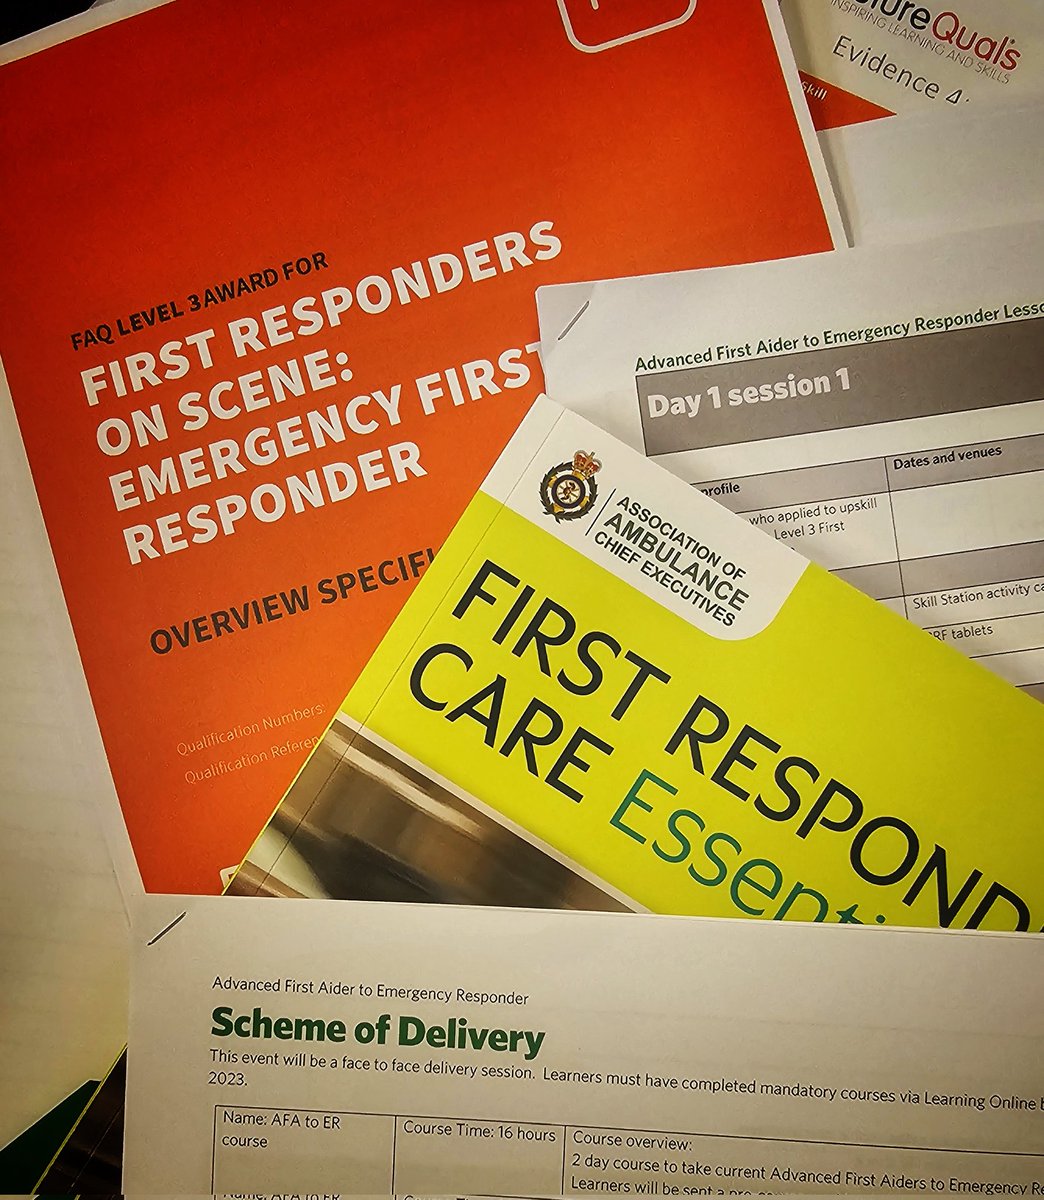 We have a number of our trainers getting set up for the full rollout of the SJA Emergency Responder role this weekend. The ER role will replace our AFA role as we continue to award our people the Level 3 @futurequals #FROS Emergency First Responder qualification.